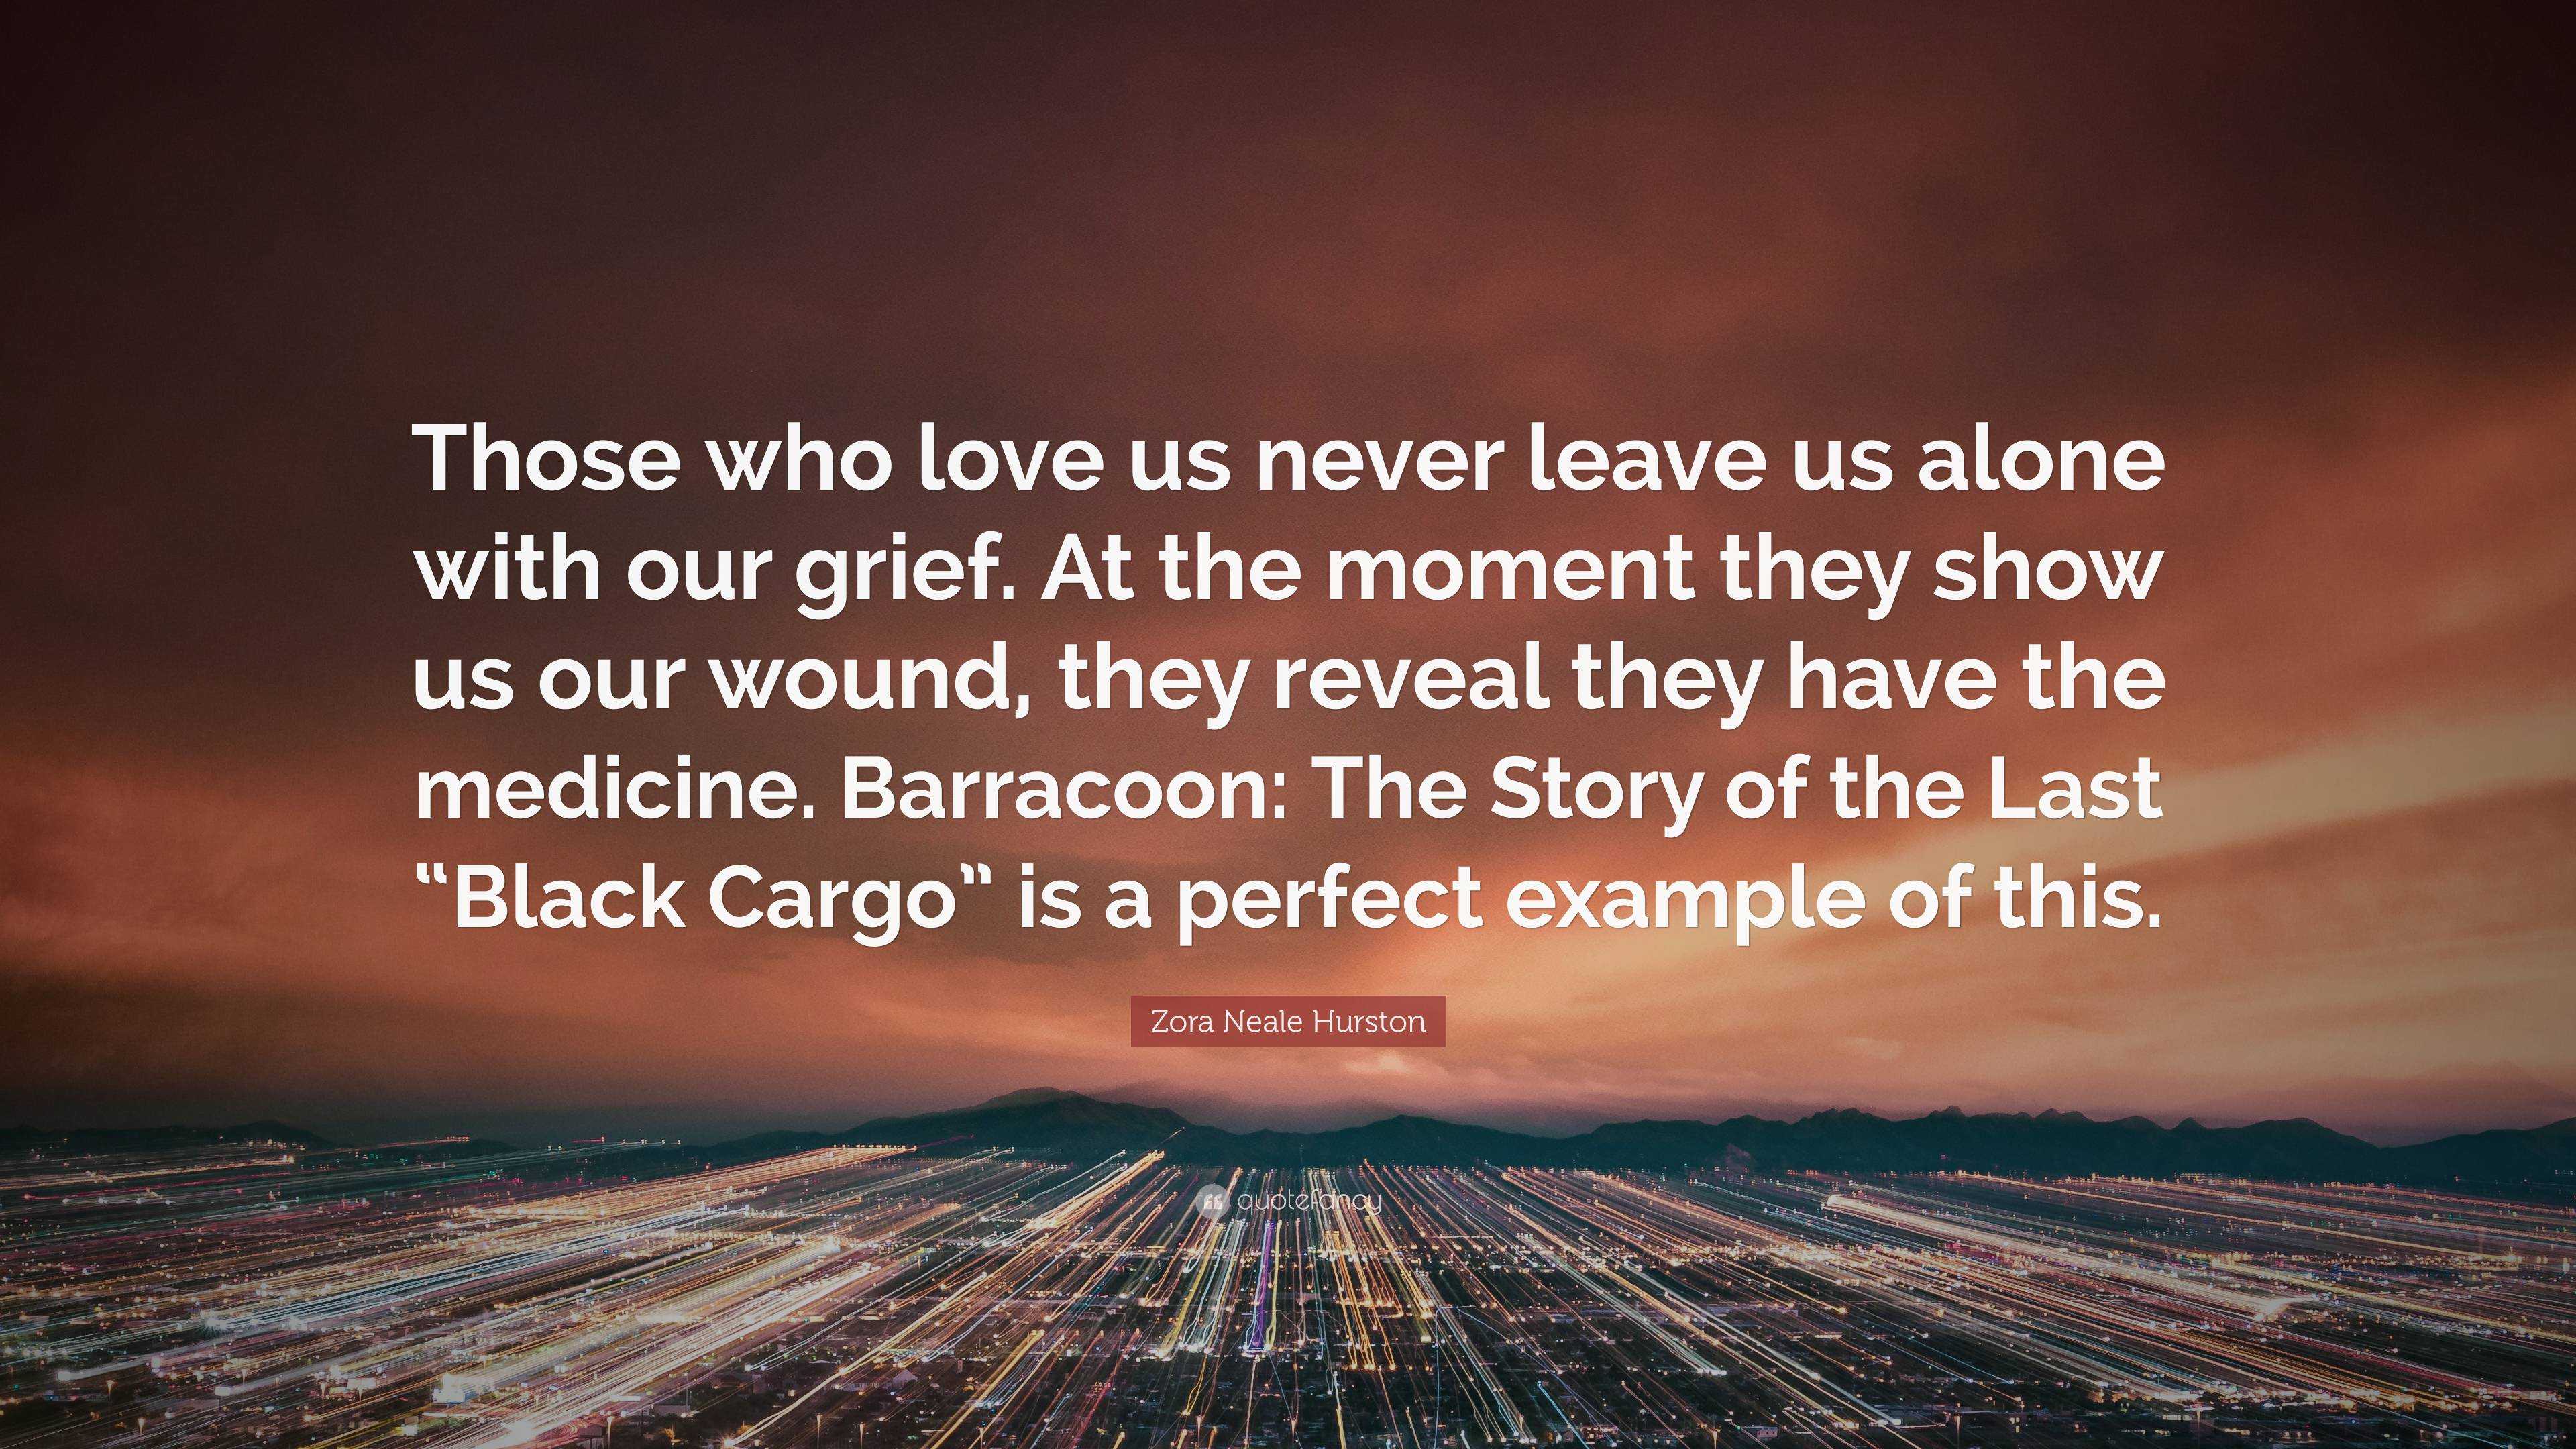 Zora Neale Hurston Quote: “Those who love us never leave us alone with our  grief. At the moment they show us our wound, they reveal they have the m...”